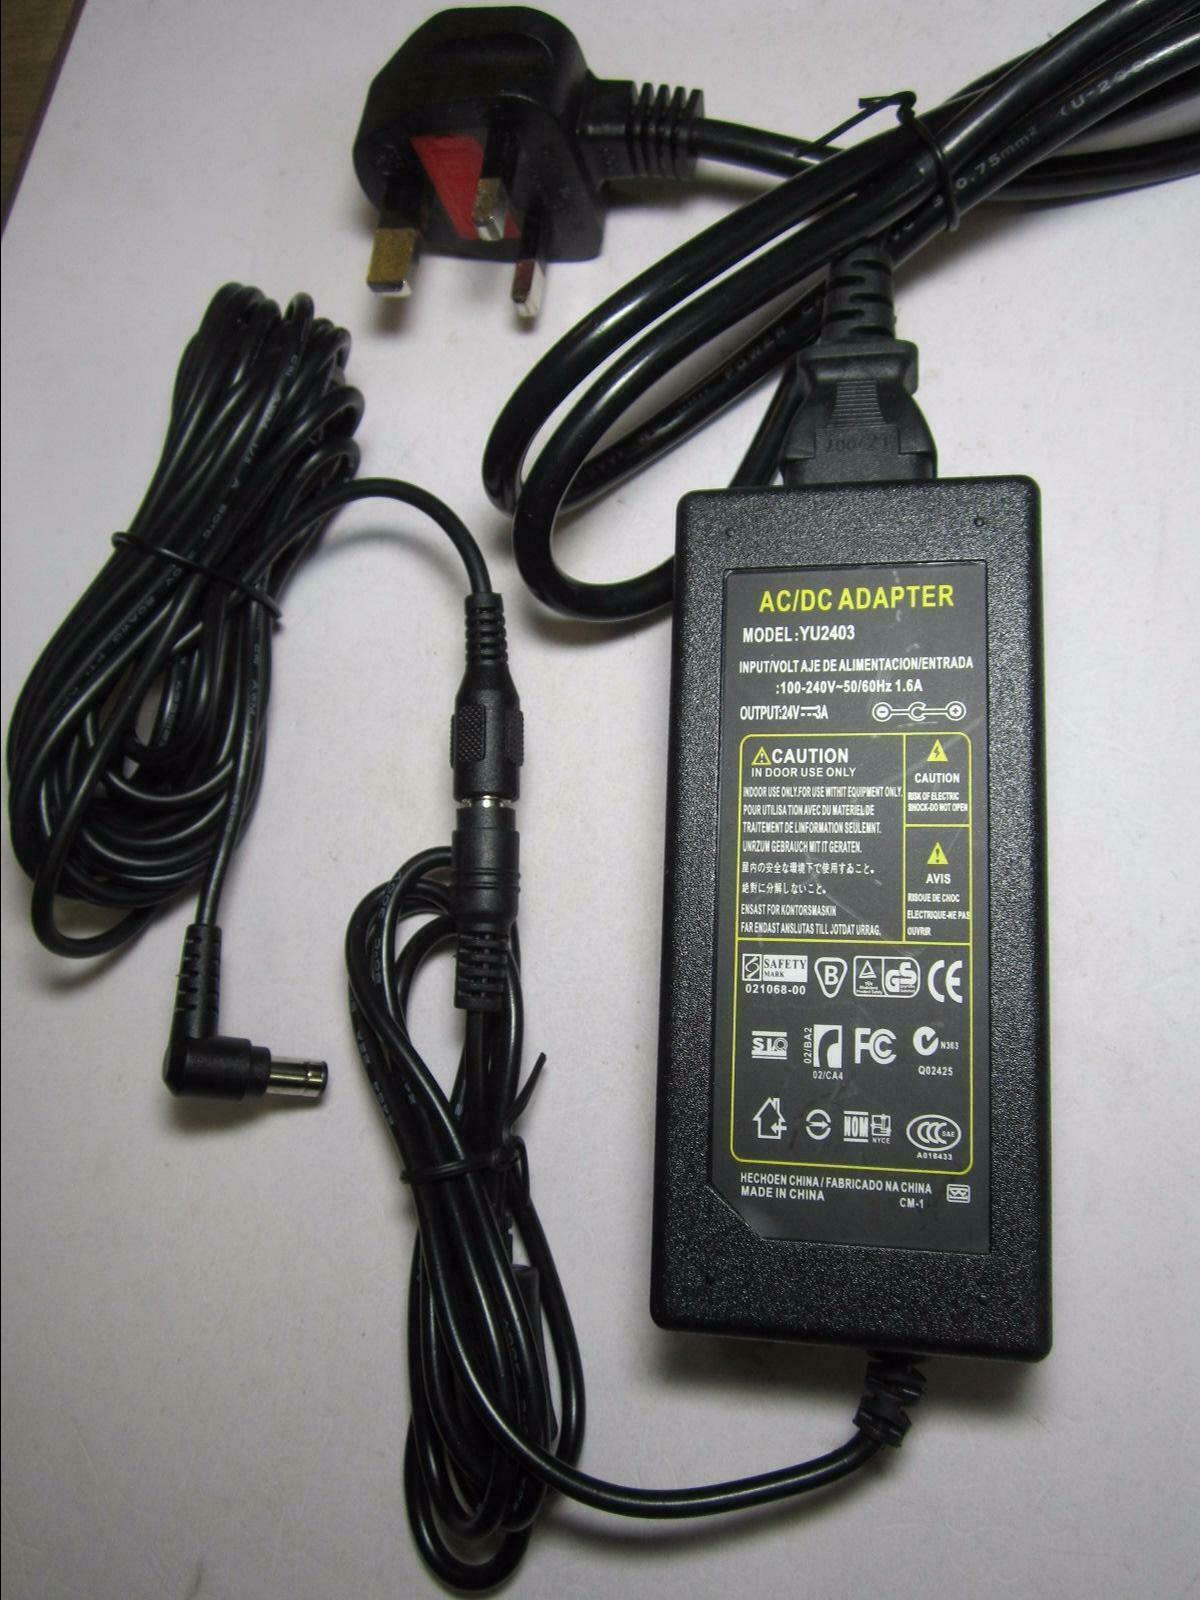 6V 8804-81 880481 Dynacraft Unicorn Stable Buddies Willow Plush AC Adapter power adapter cord supply ac charger Techn